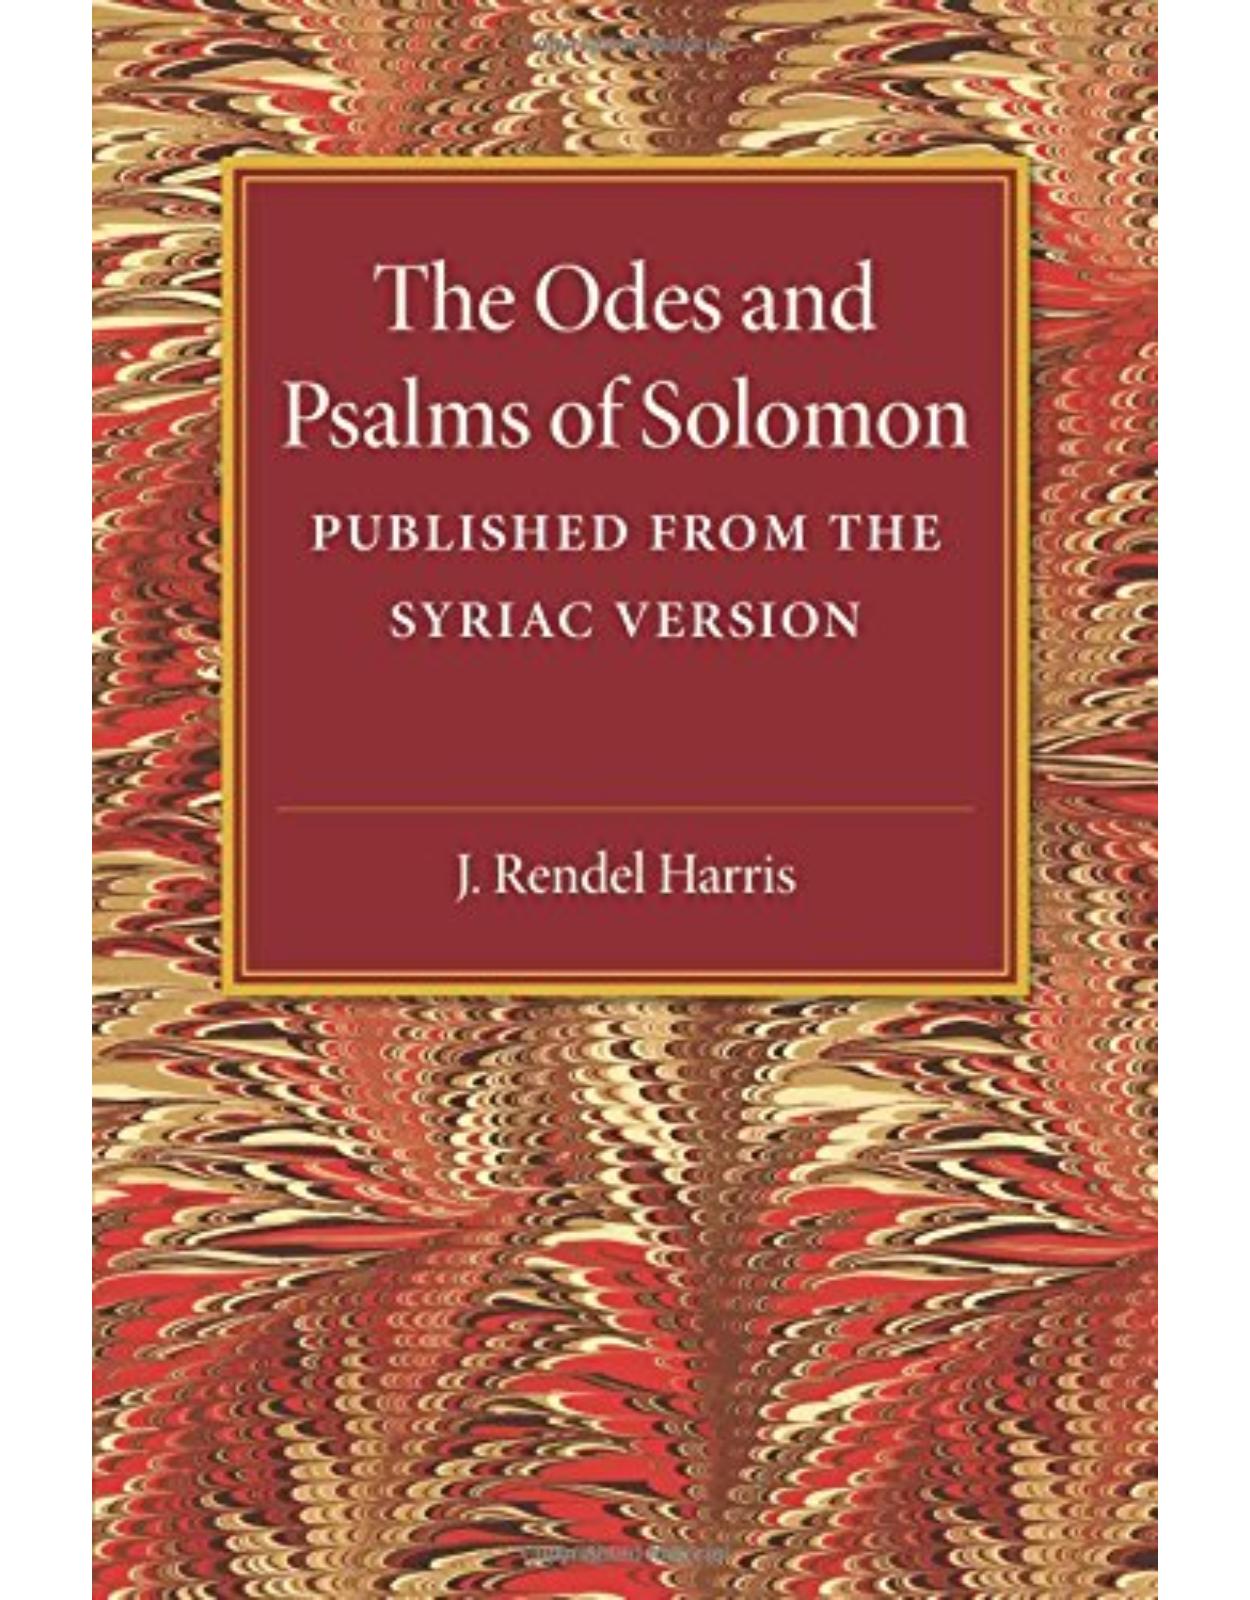 The Odes and Psalms of Solomon: Published from the Syriac version